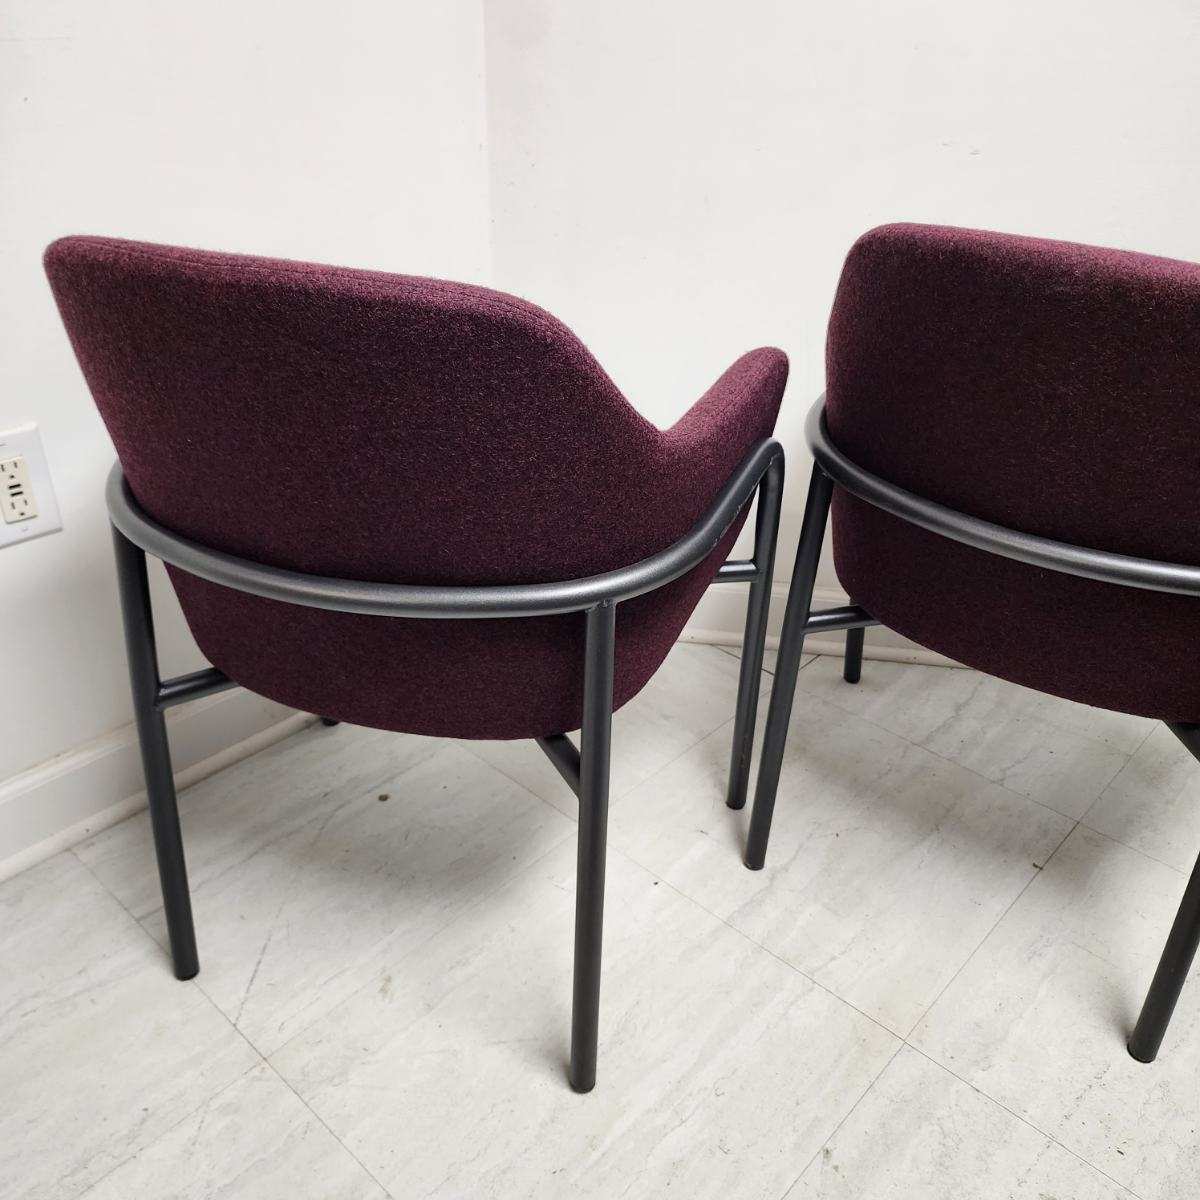 Pair of Modern "Very Good and Proper" UK Club Arm Chairs